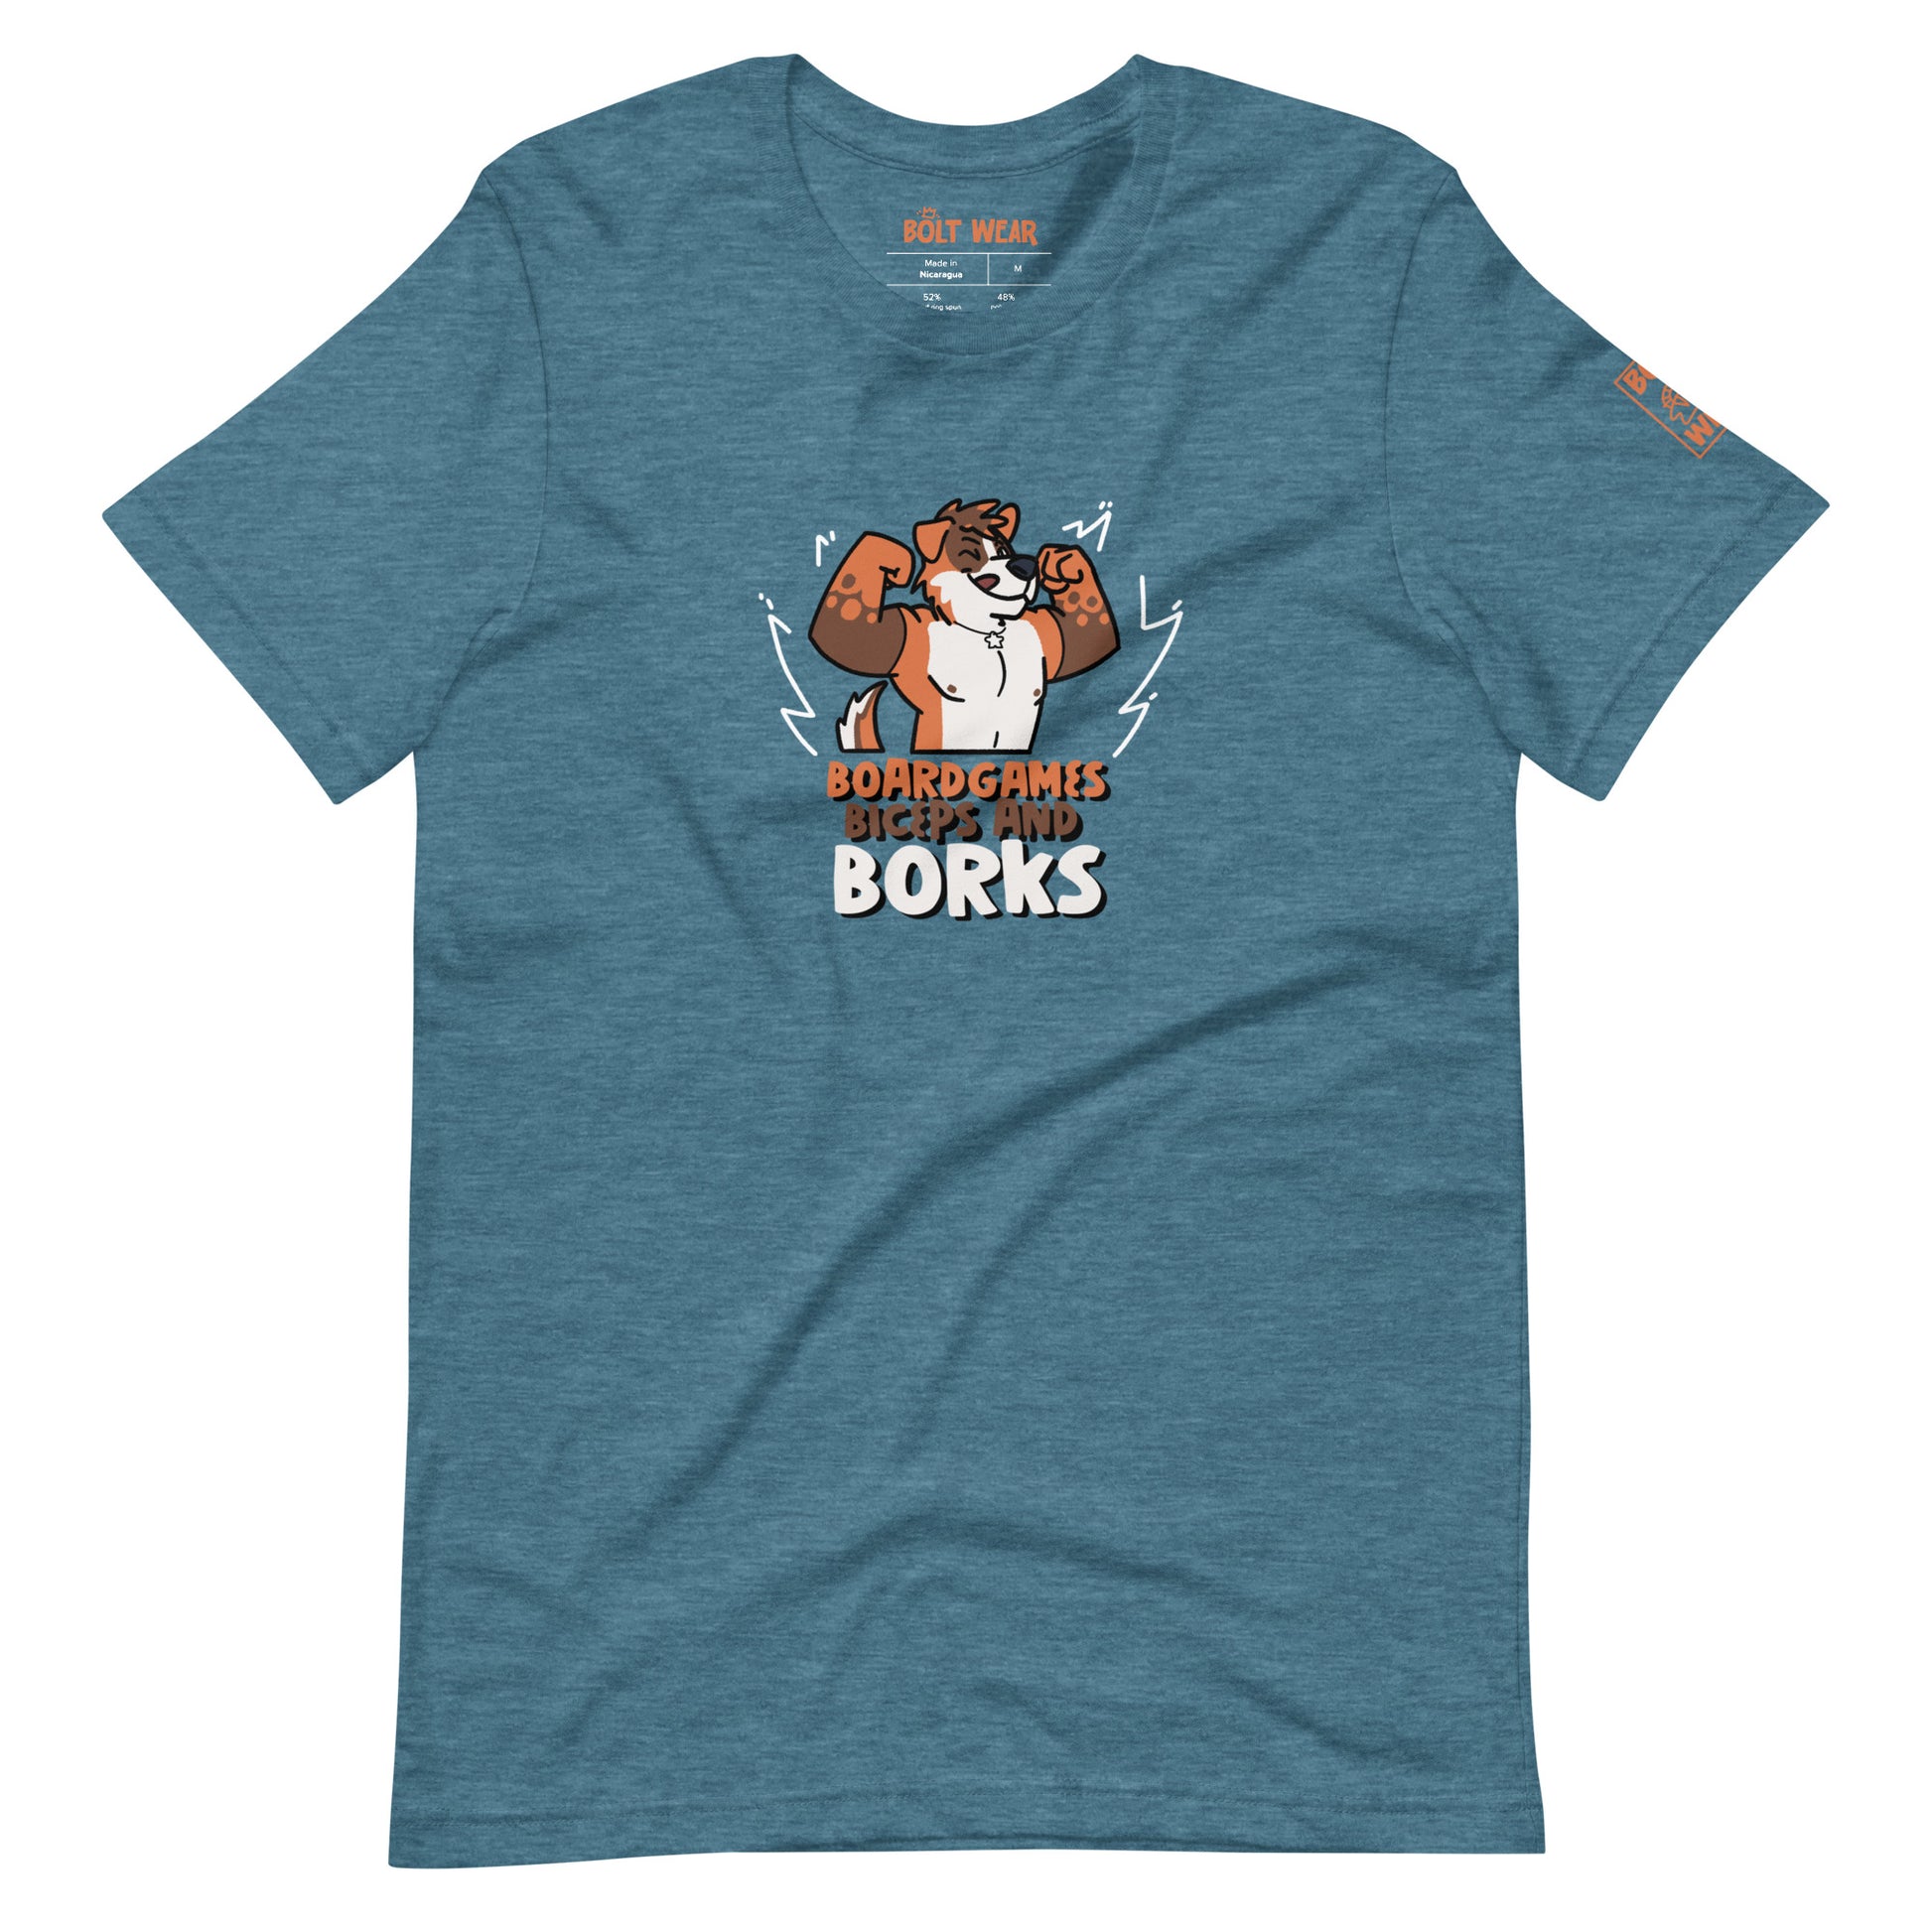 Heather t-shirt with orange and brown furry dog flexing with the text Board Games Biceps and Borks underneath them. Orange logo featured on sleeve